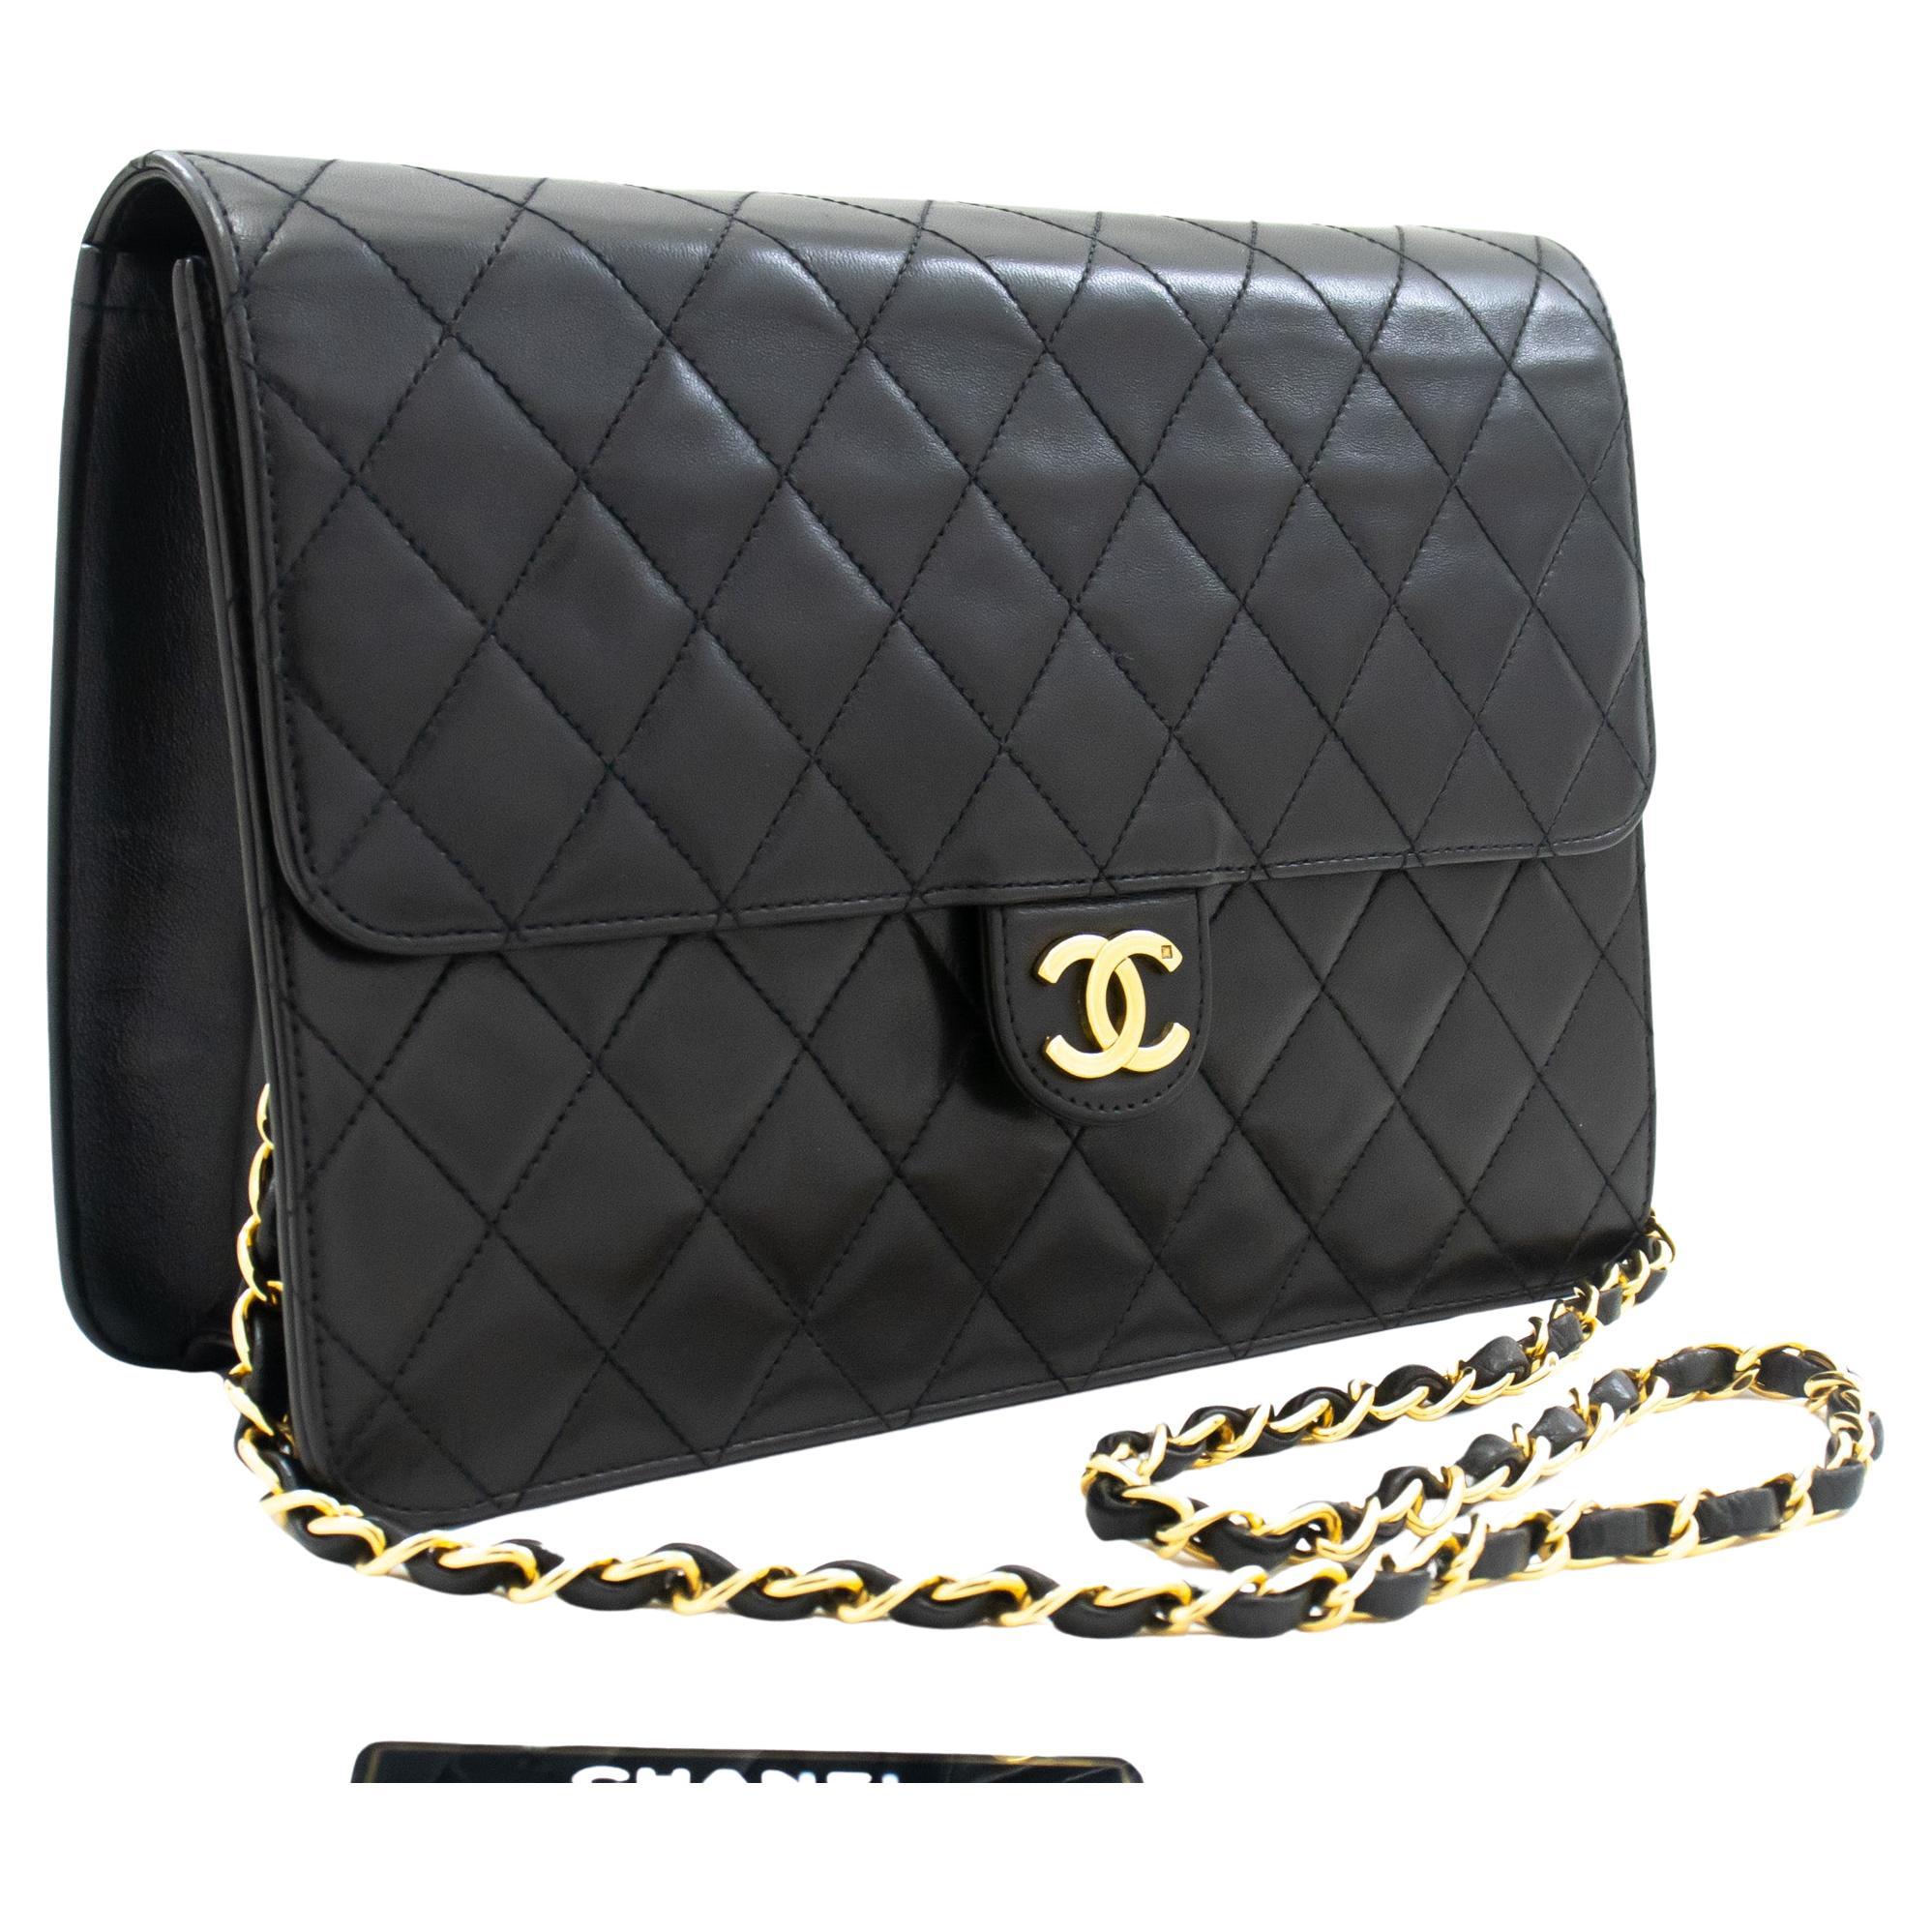 Chanel Grained Calfskin Stitched Small Woc CC Flap Bag Pink Chain Flap